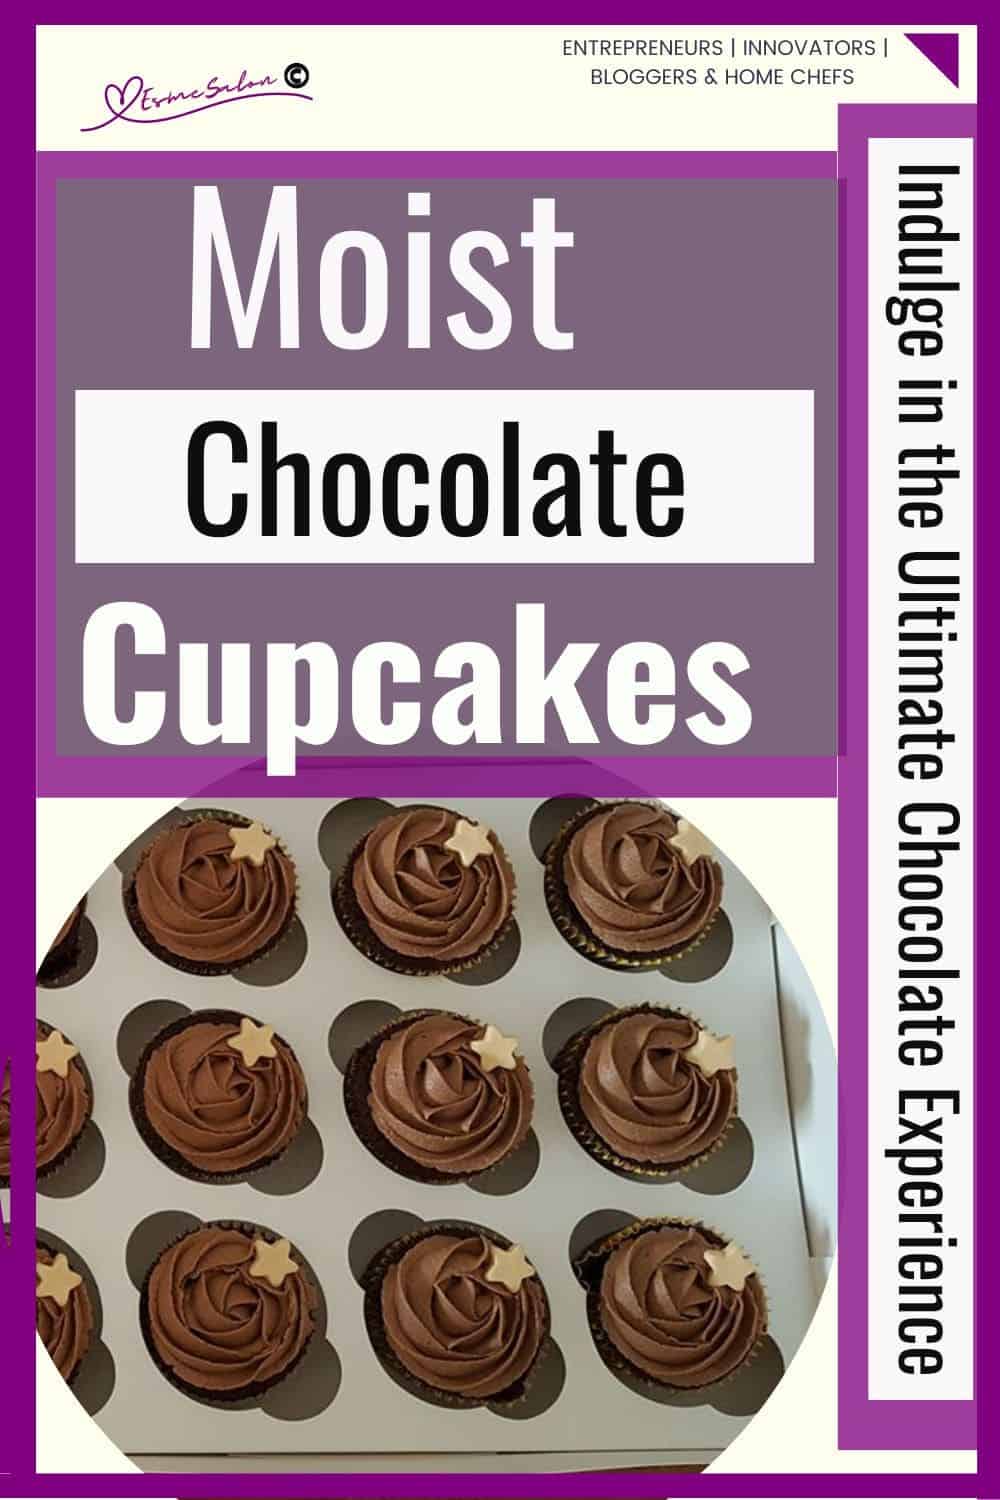 an image of Moist Chocolate Cupcakes with chocolate topping and a golden star as decoration in a cardboard cupcake display tray